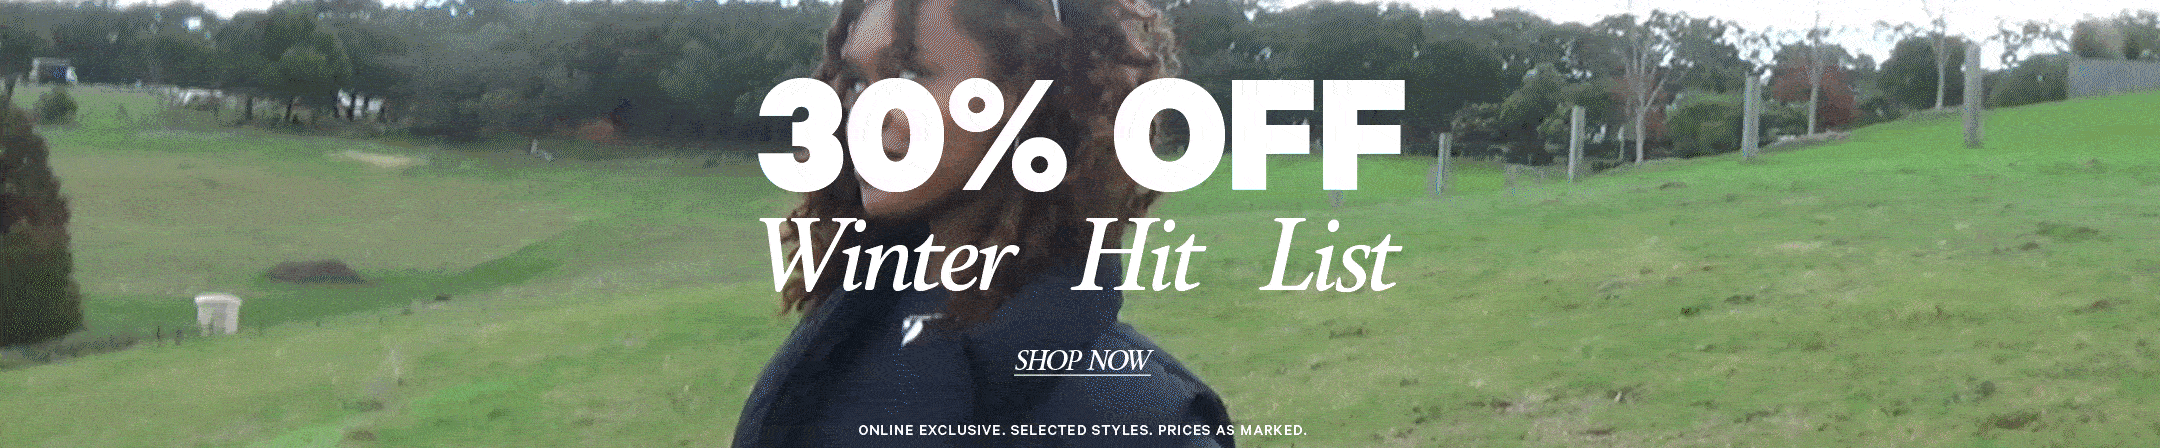 Shop 30% Off the Winter Hit List at Supre. Online Exclusive. Selected Styles. Prices as Marked.